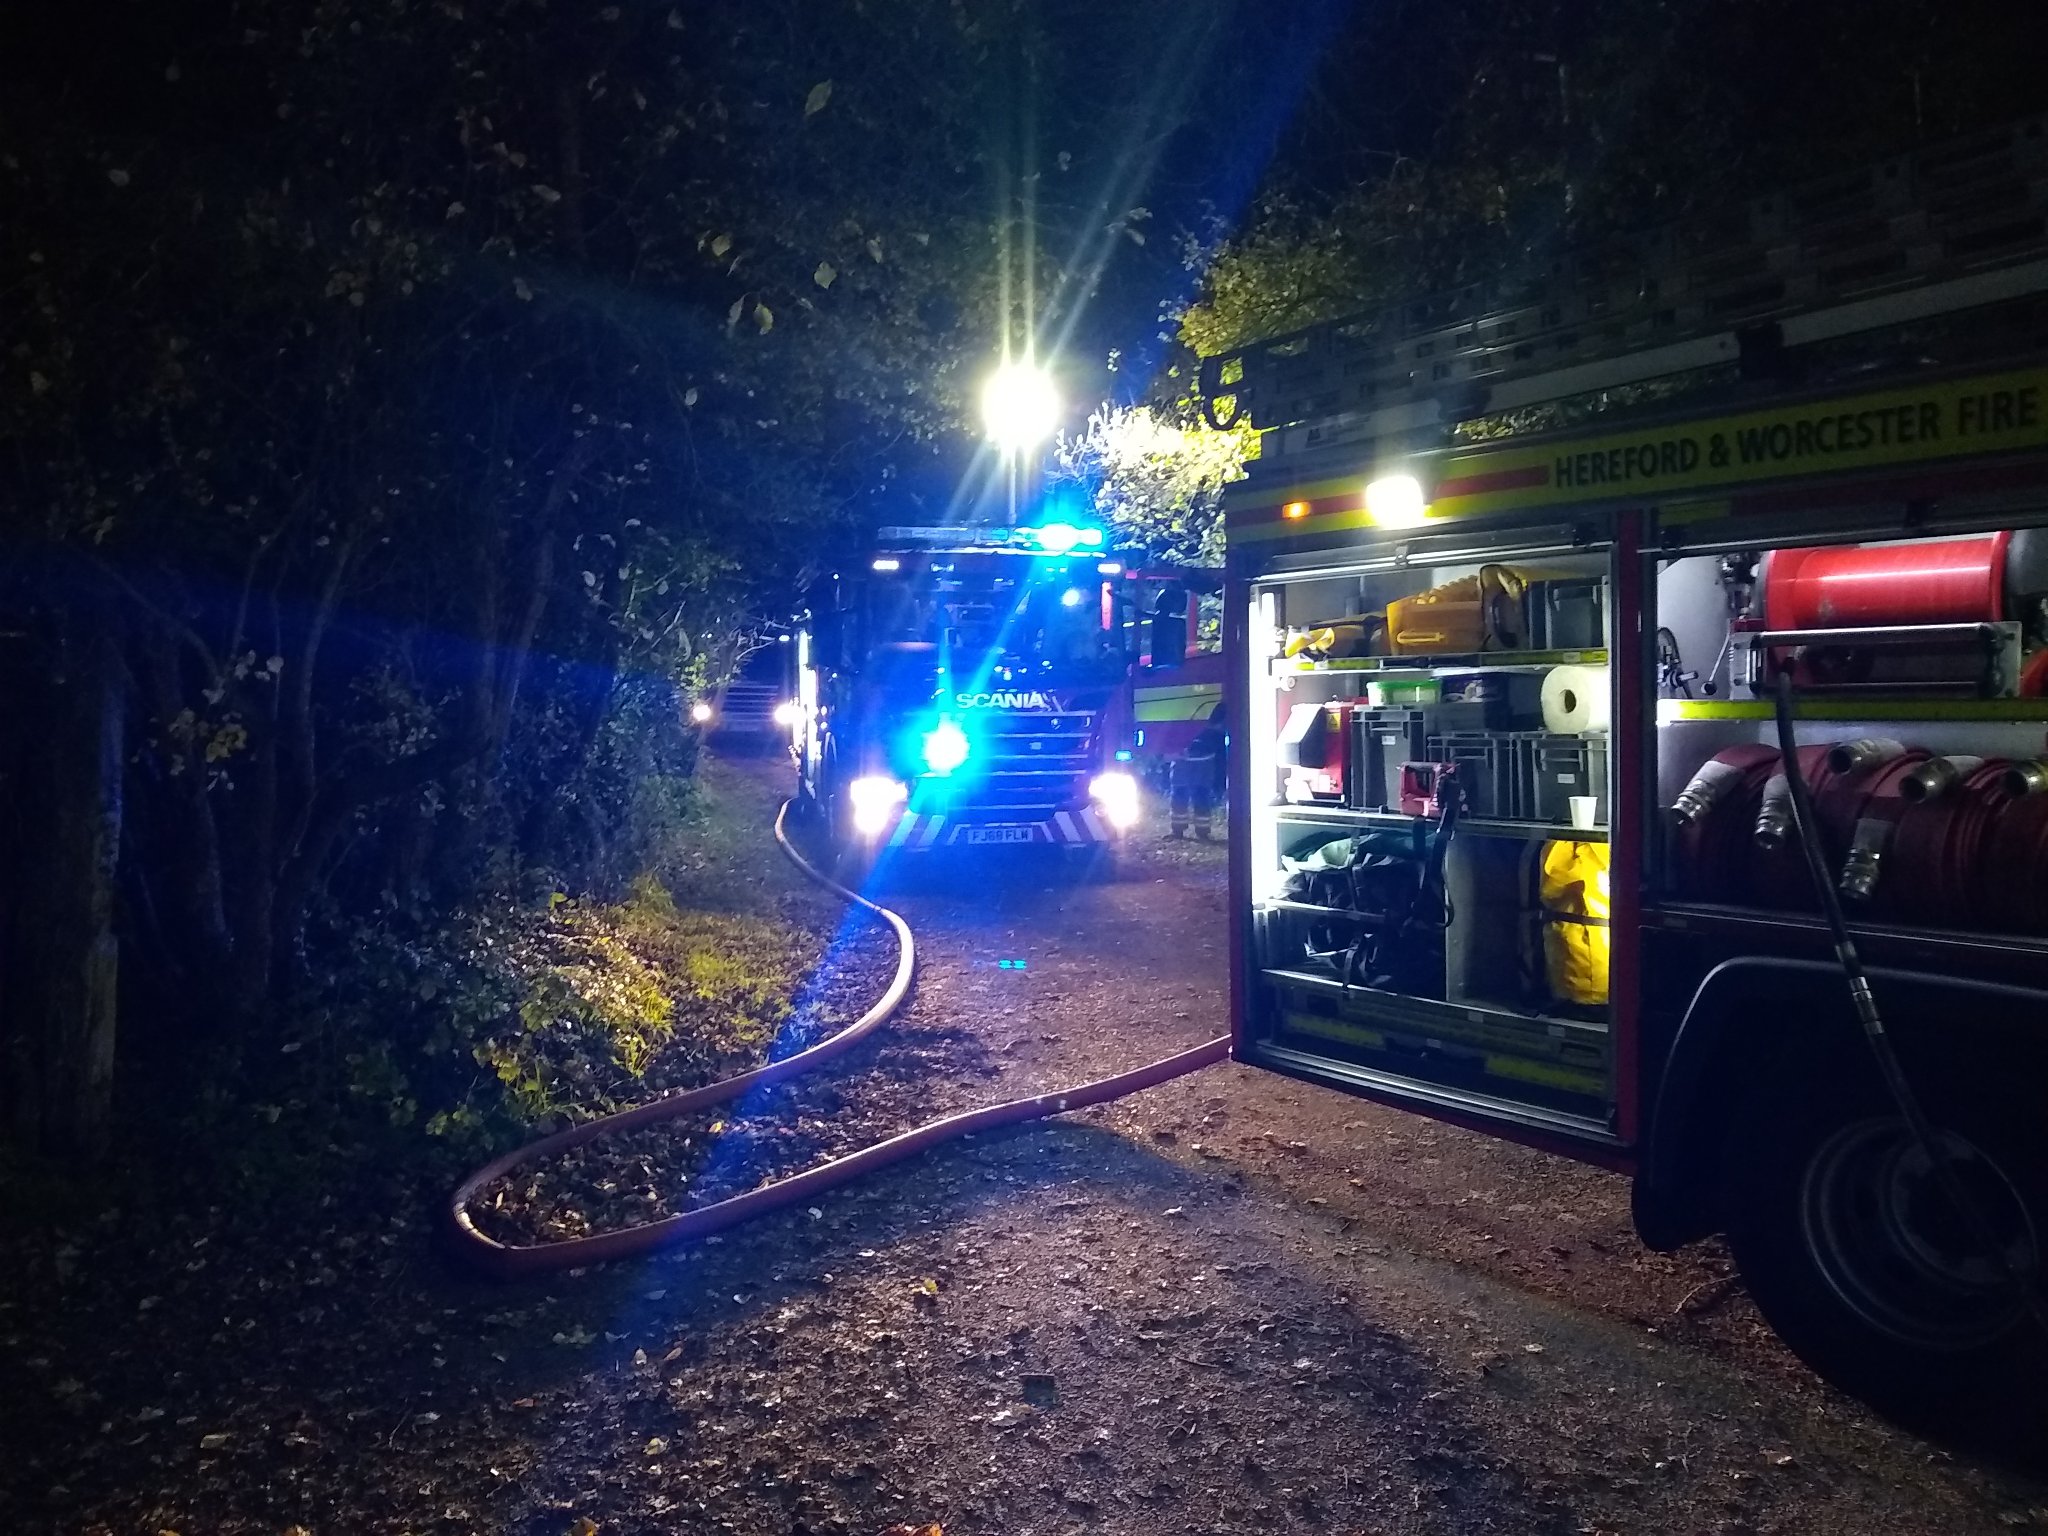 NEWS | Emergency services have been called to a house fire in Herefordshire